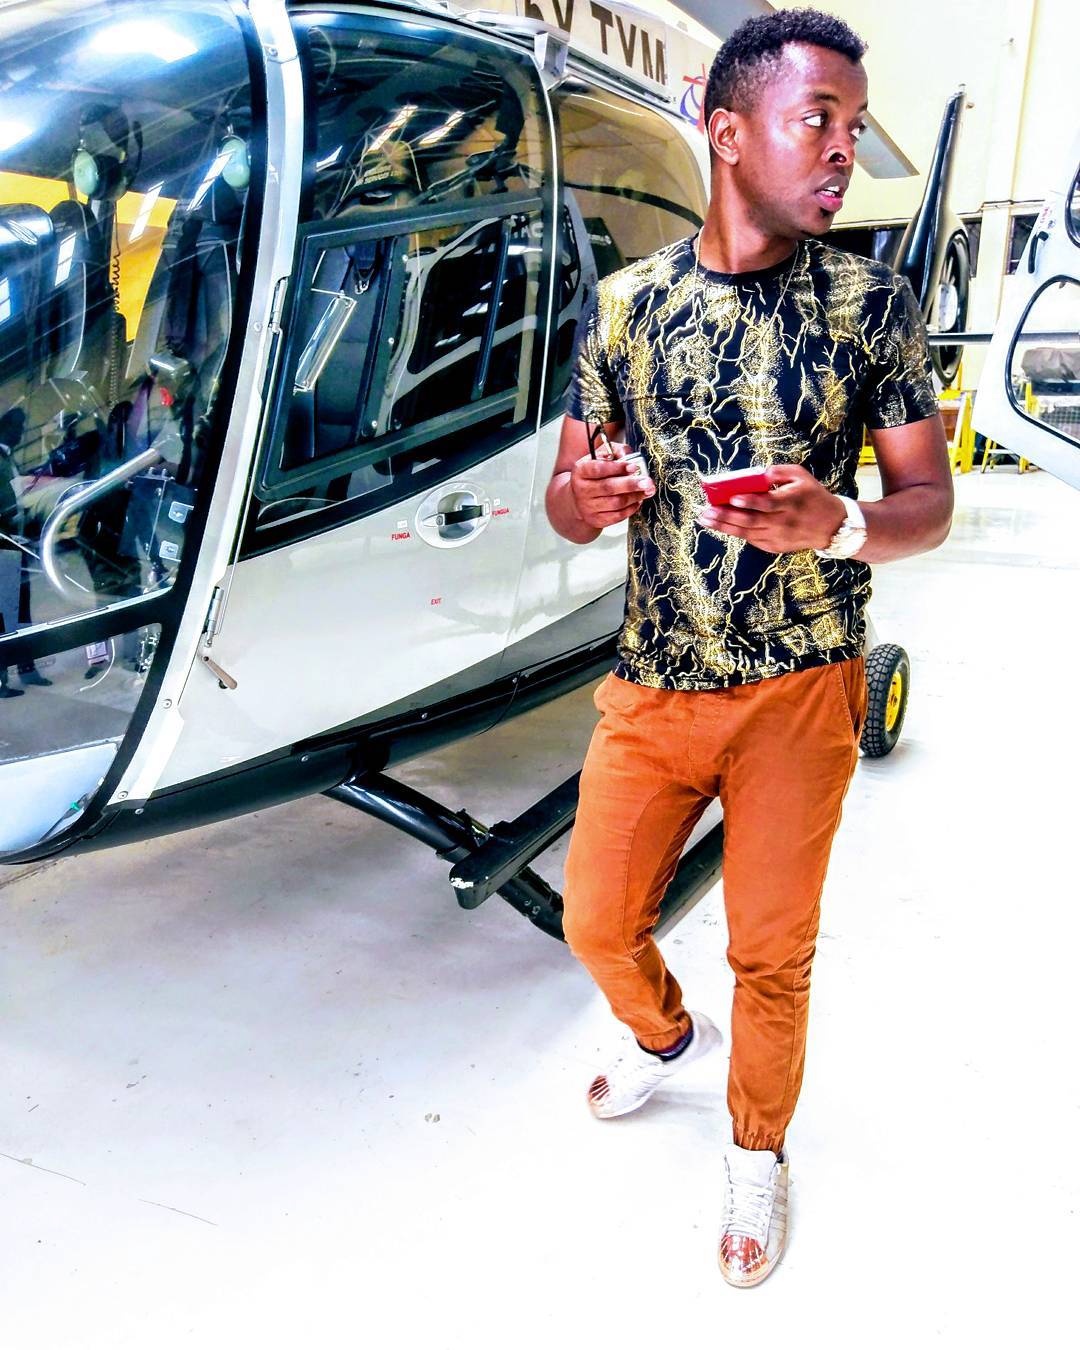 Ringtone reveals where he got the Ksh 20 million to purchase an helicopter